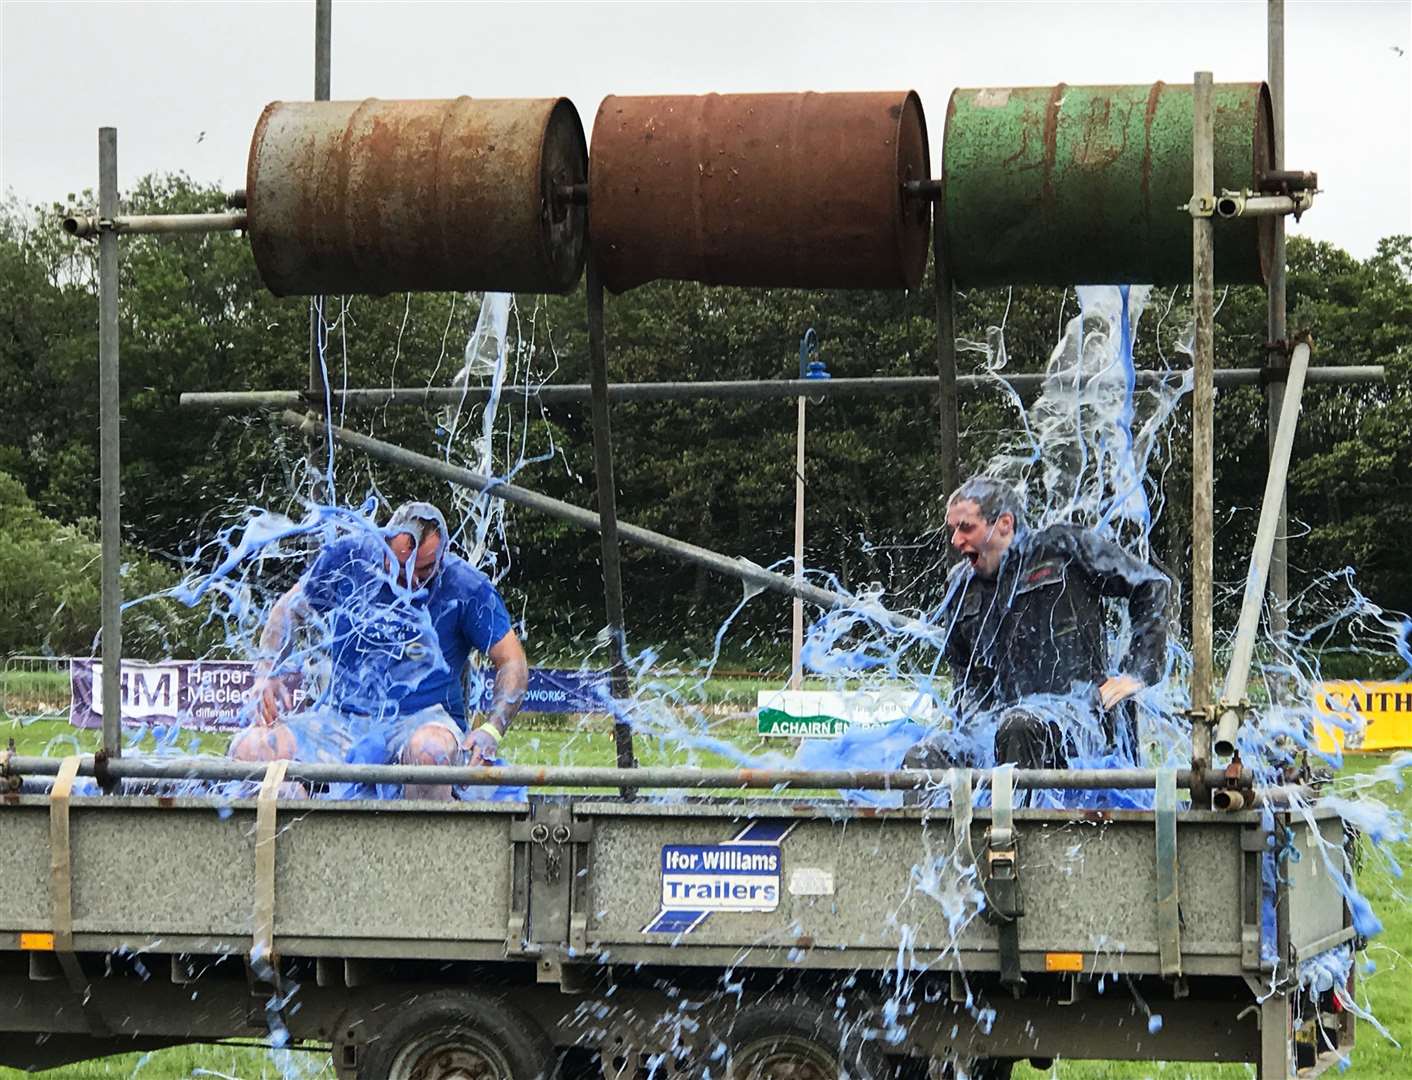 Getting a drenching in the YFC charity gunge event are John Anderson (left) and James Gunn. The young farmers raised nearly £900 for Crohn’s and Colitis UK. Picture: Jean Gunn